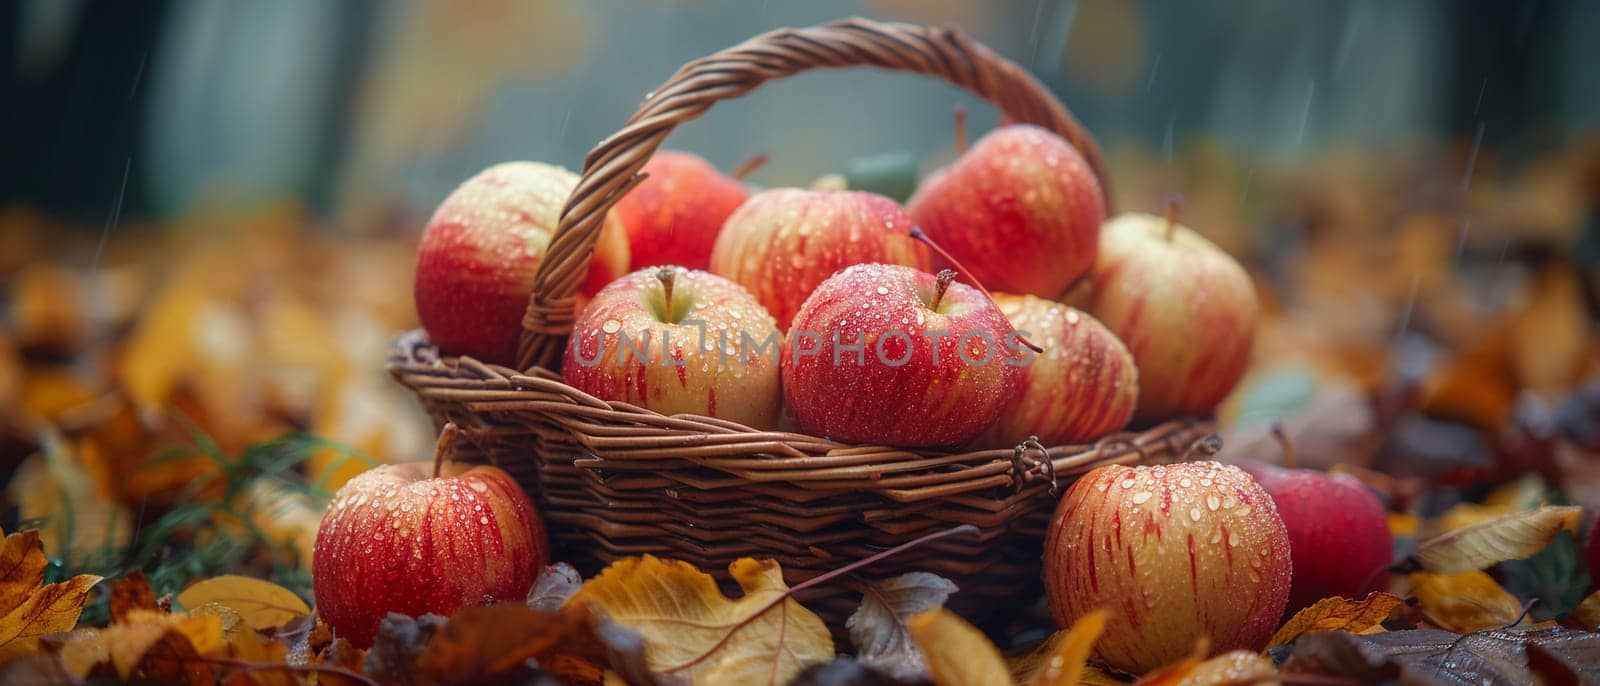 Basket full of freshly picked apples, representing harvest and agriculture.